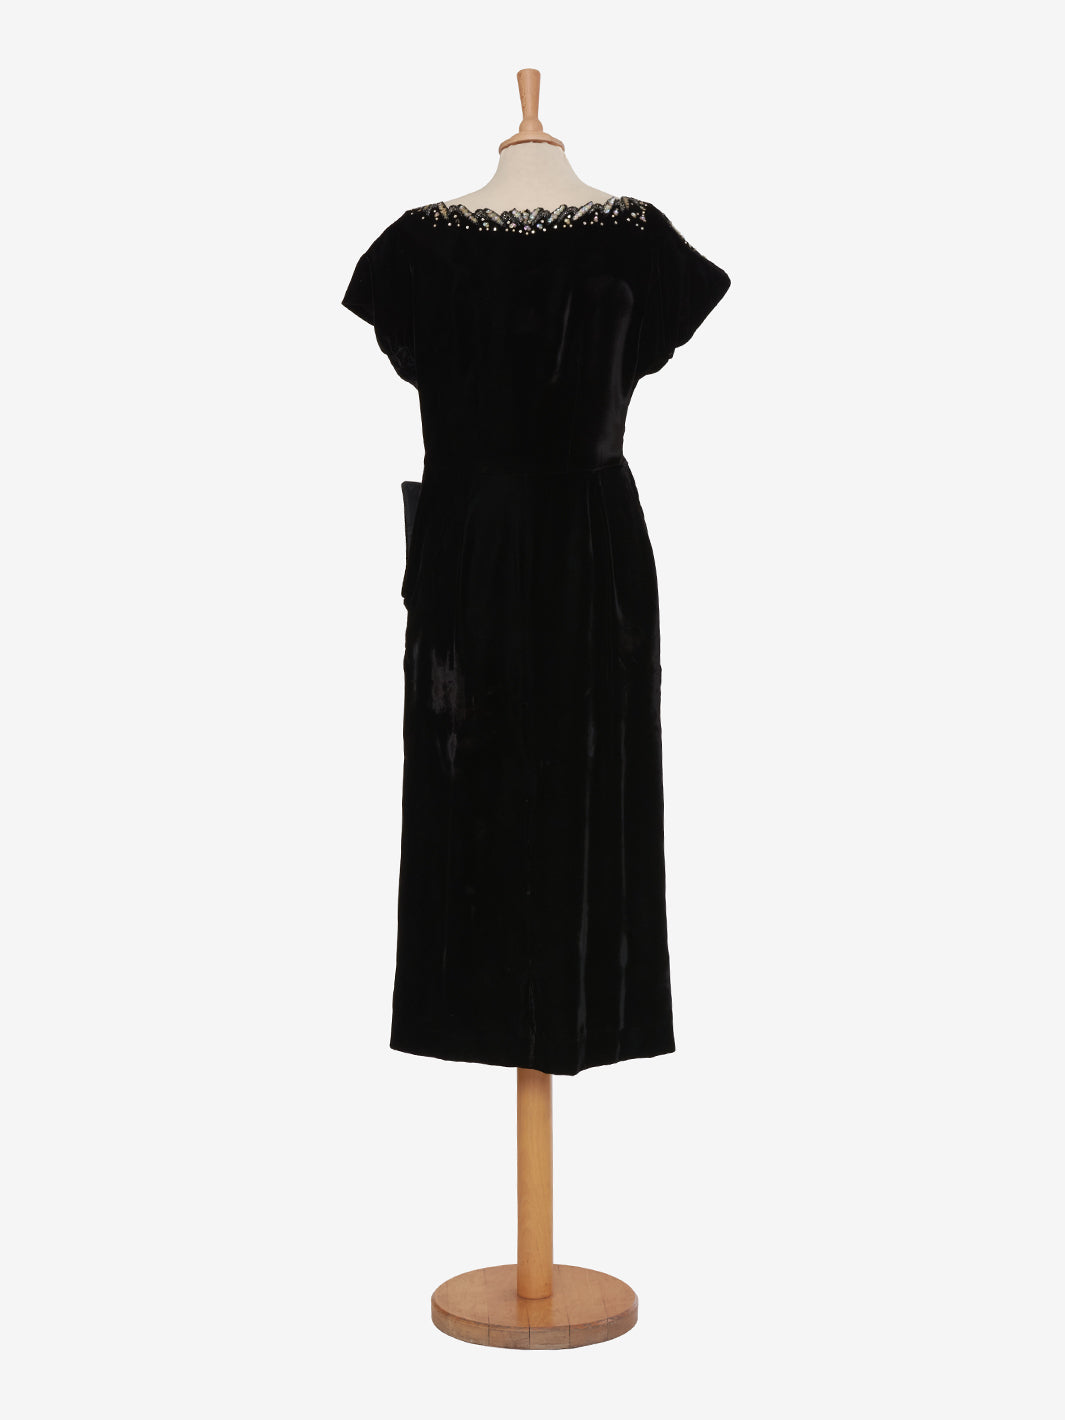 Vintage velvet dress with sequin embroidery - '40s